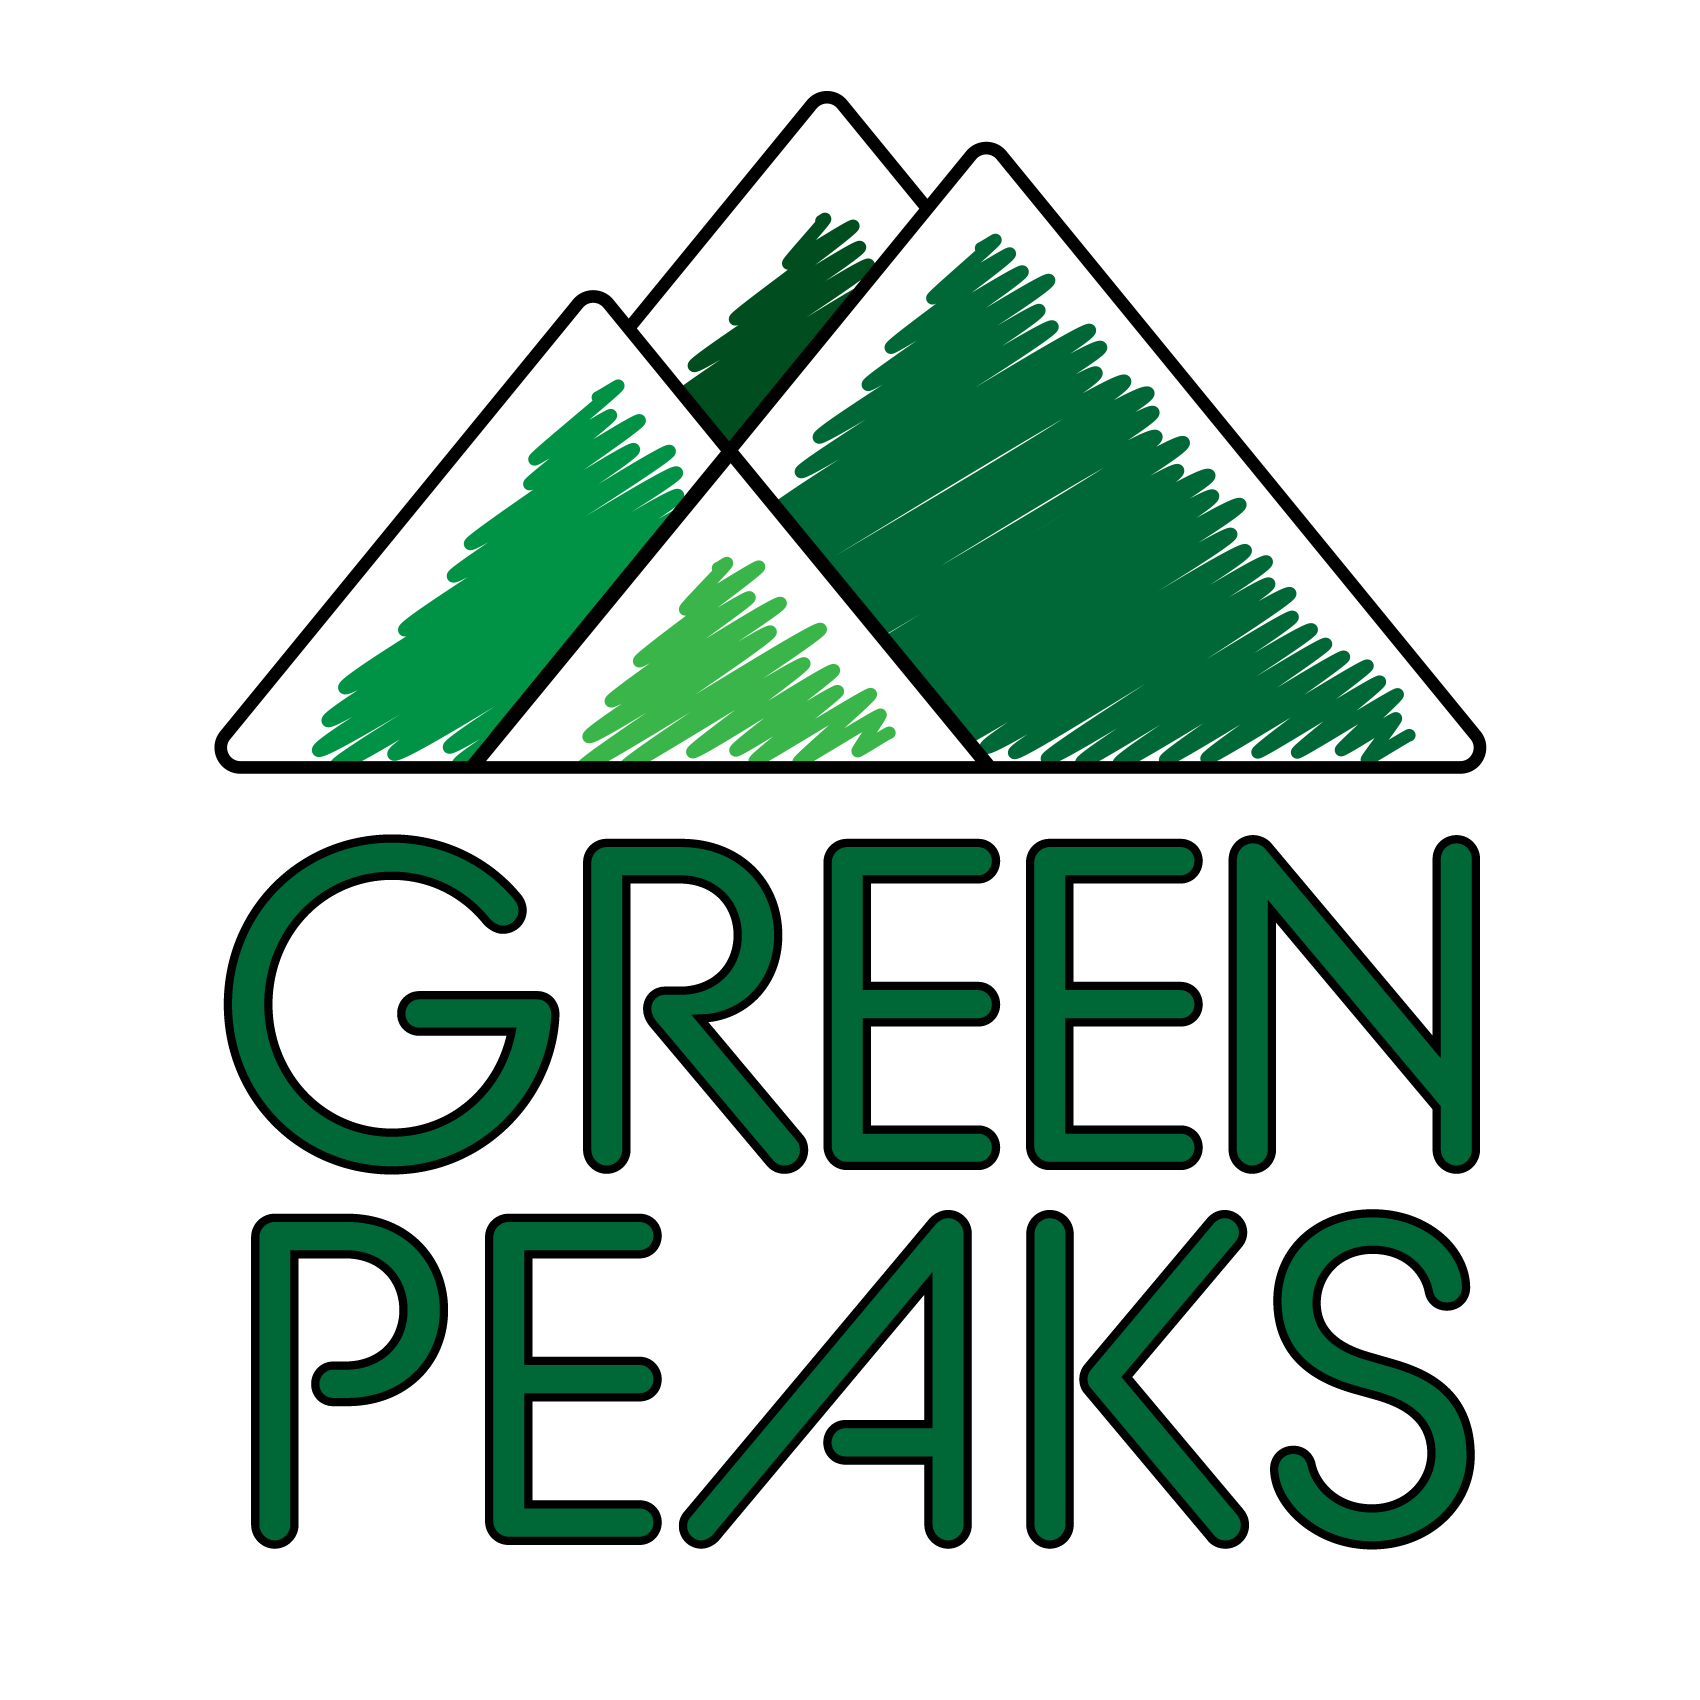 The Green Peaks BC Logo featuring four green peaks.